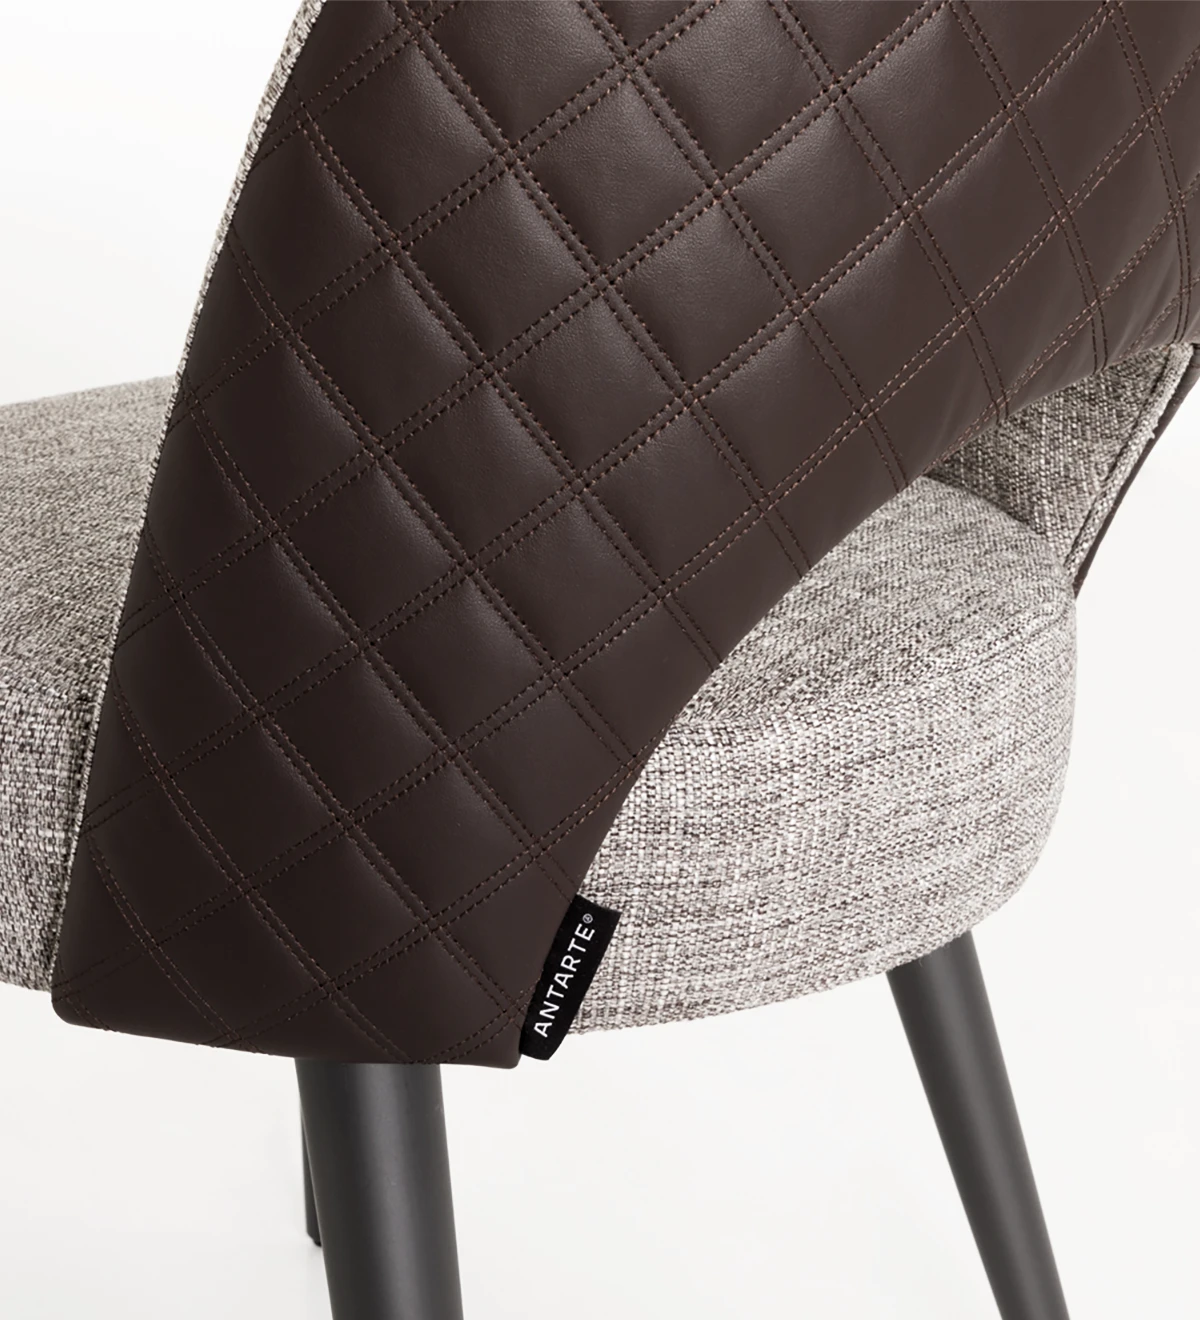 Chair upholstered in fabric, black lacquered feet.